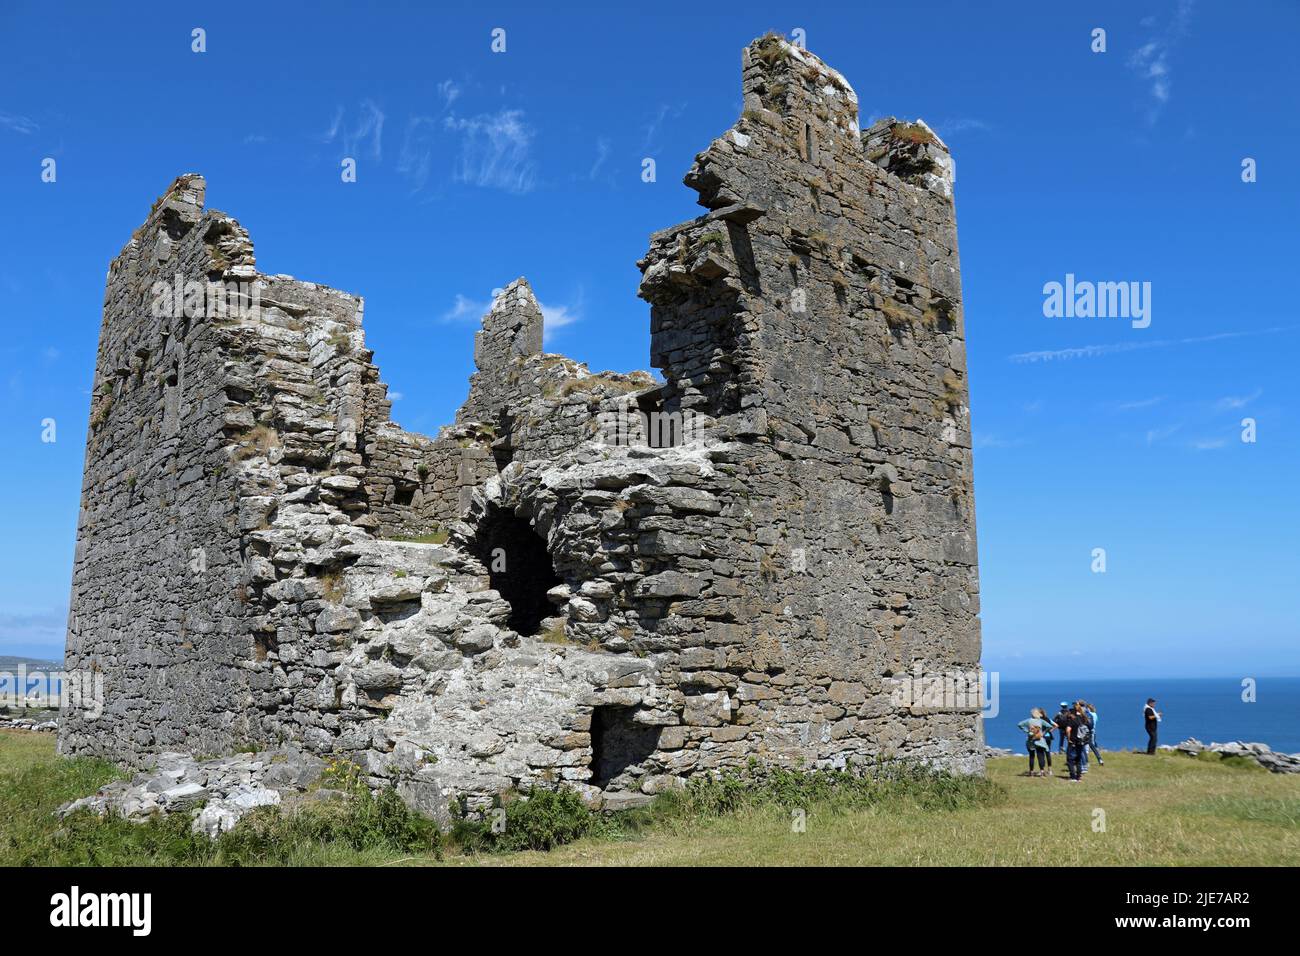 Ruins of Furmina Castle at Inisheer in the Republic of Ireland Stock Photo